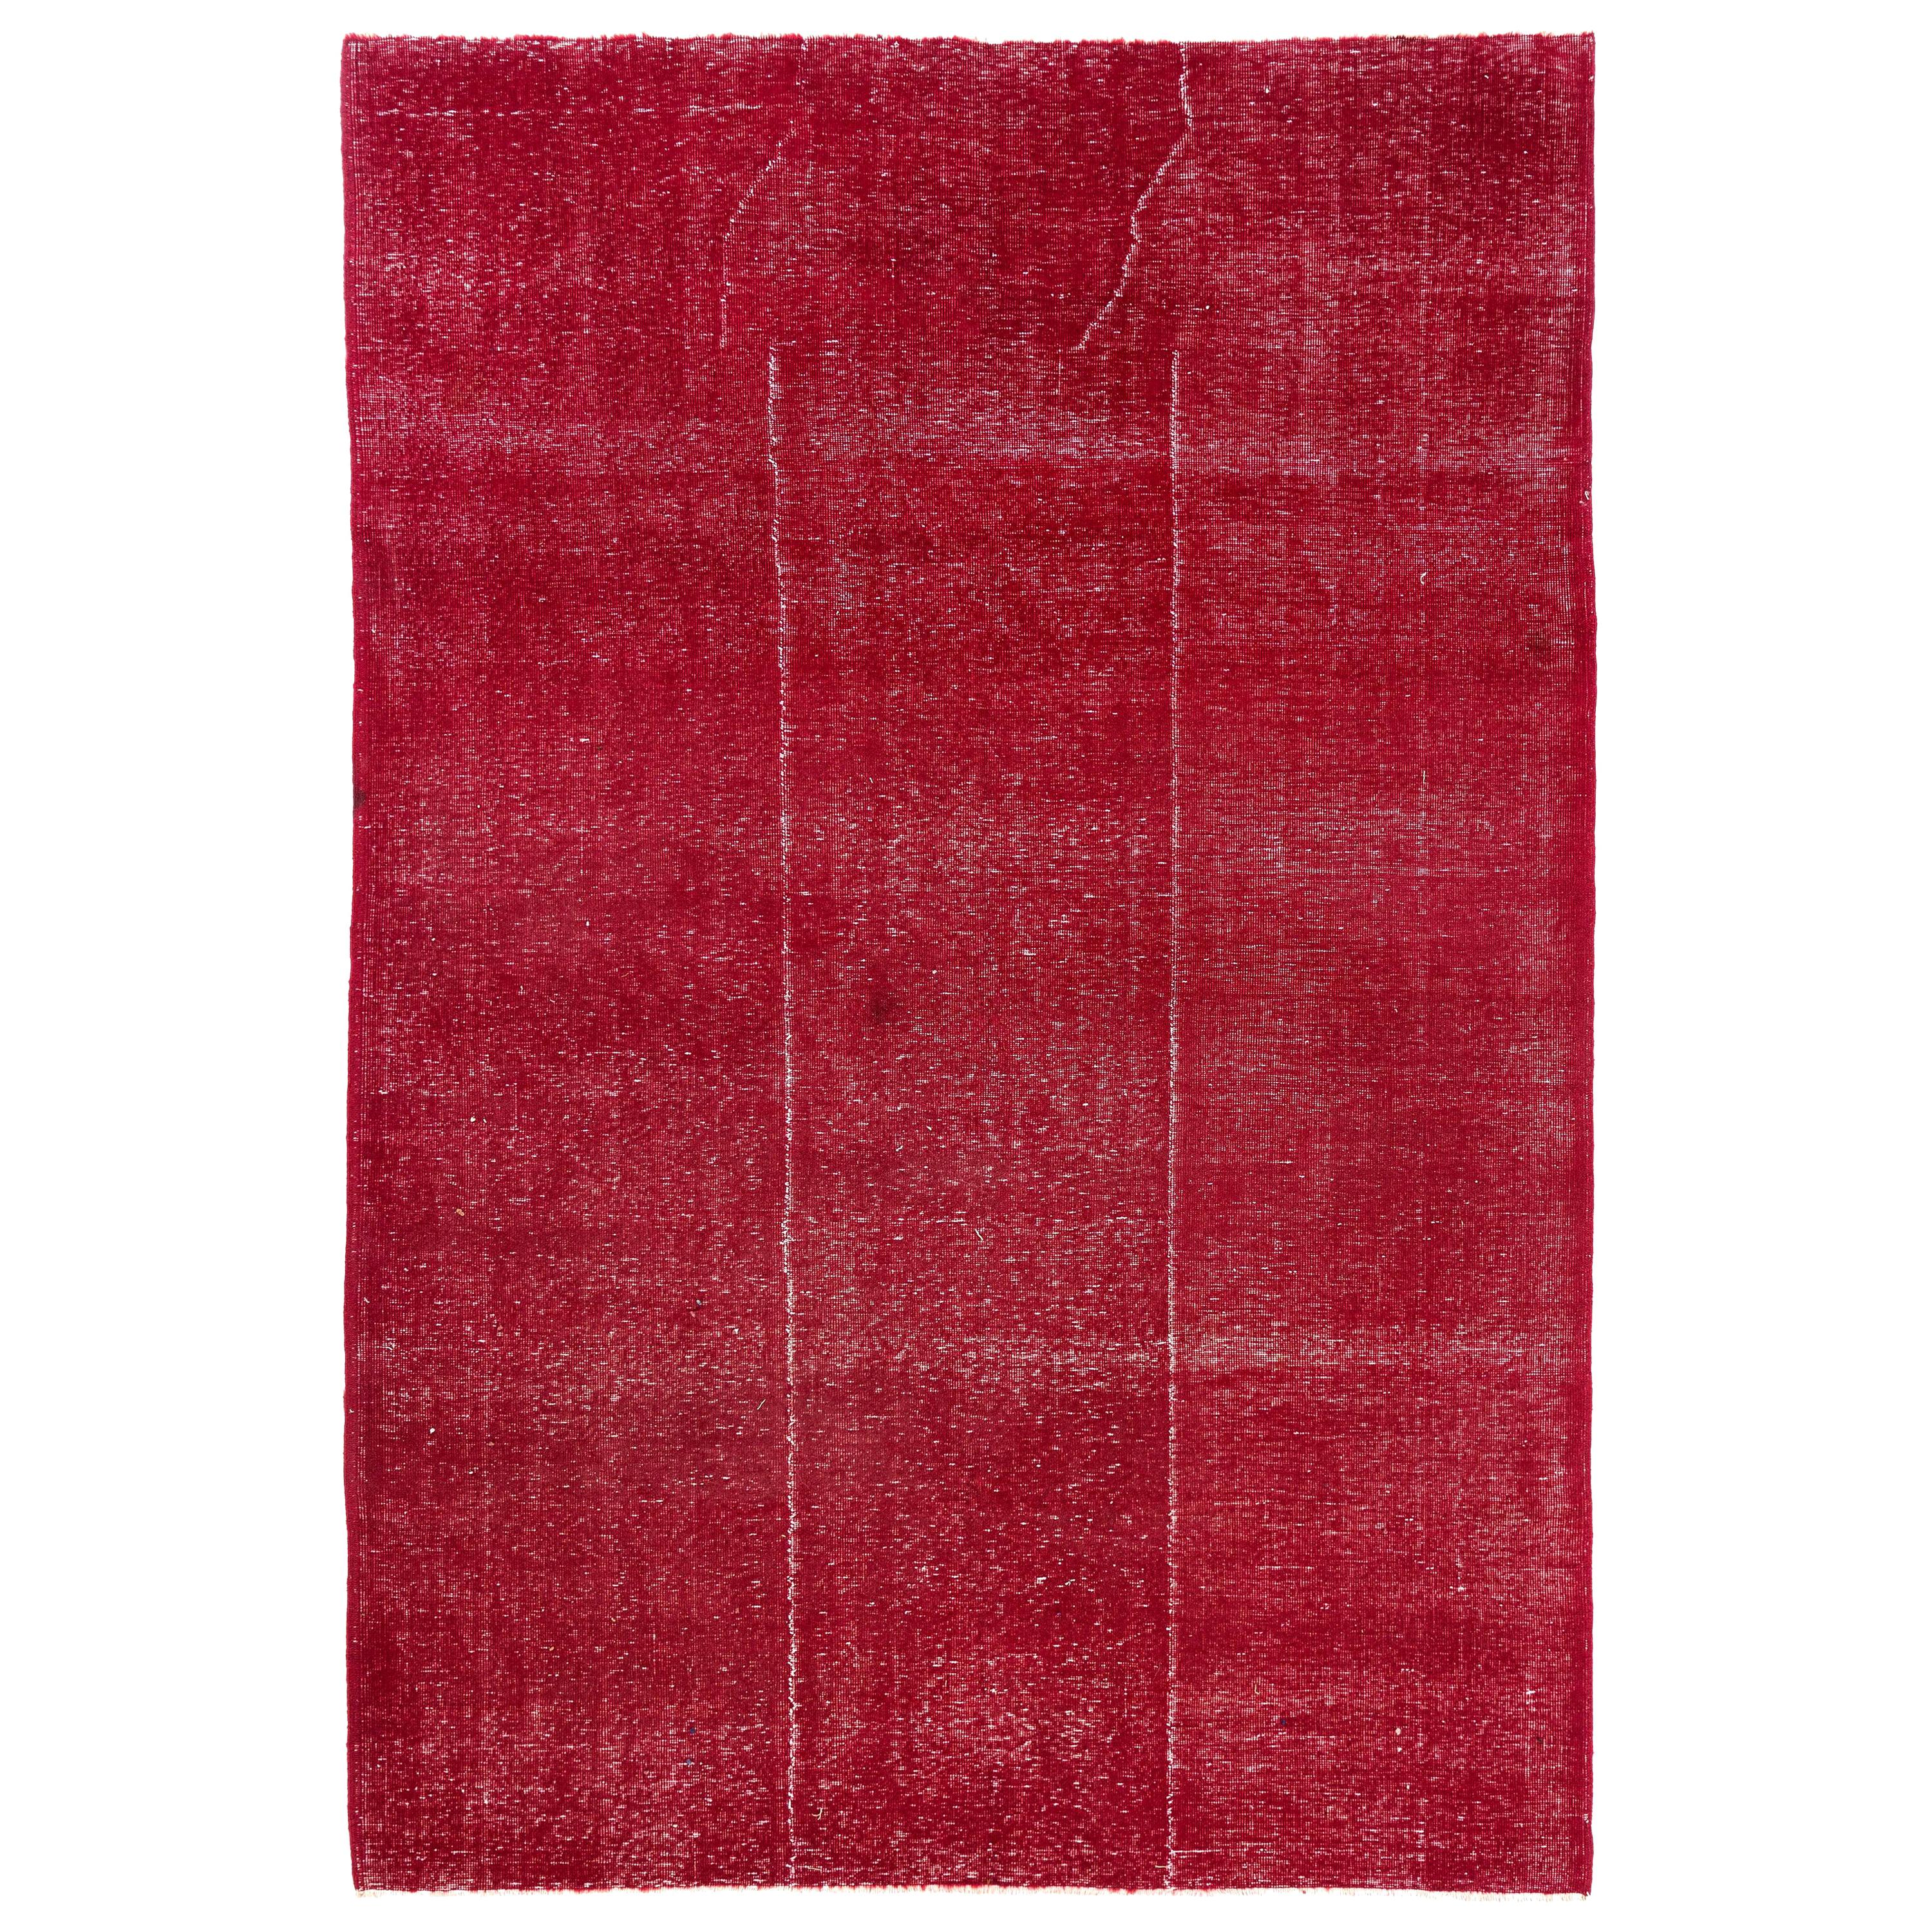 6.7x10 Ft Plain Vintage Handmade Rug Overdyed in Red for Modern Interiors For Sale